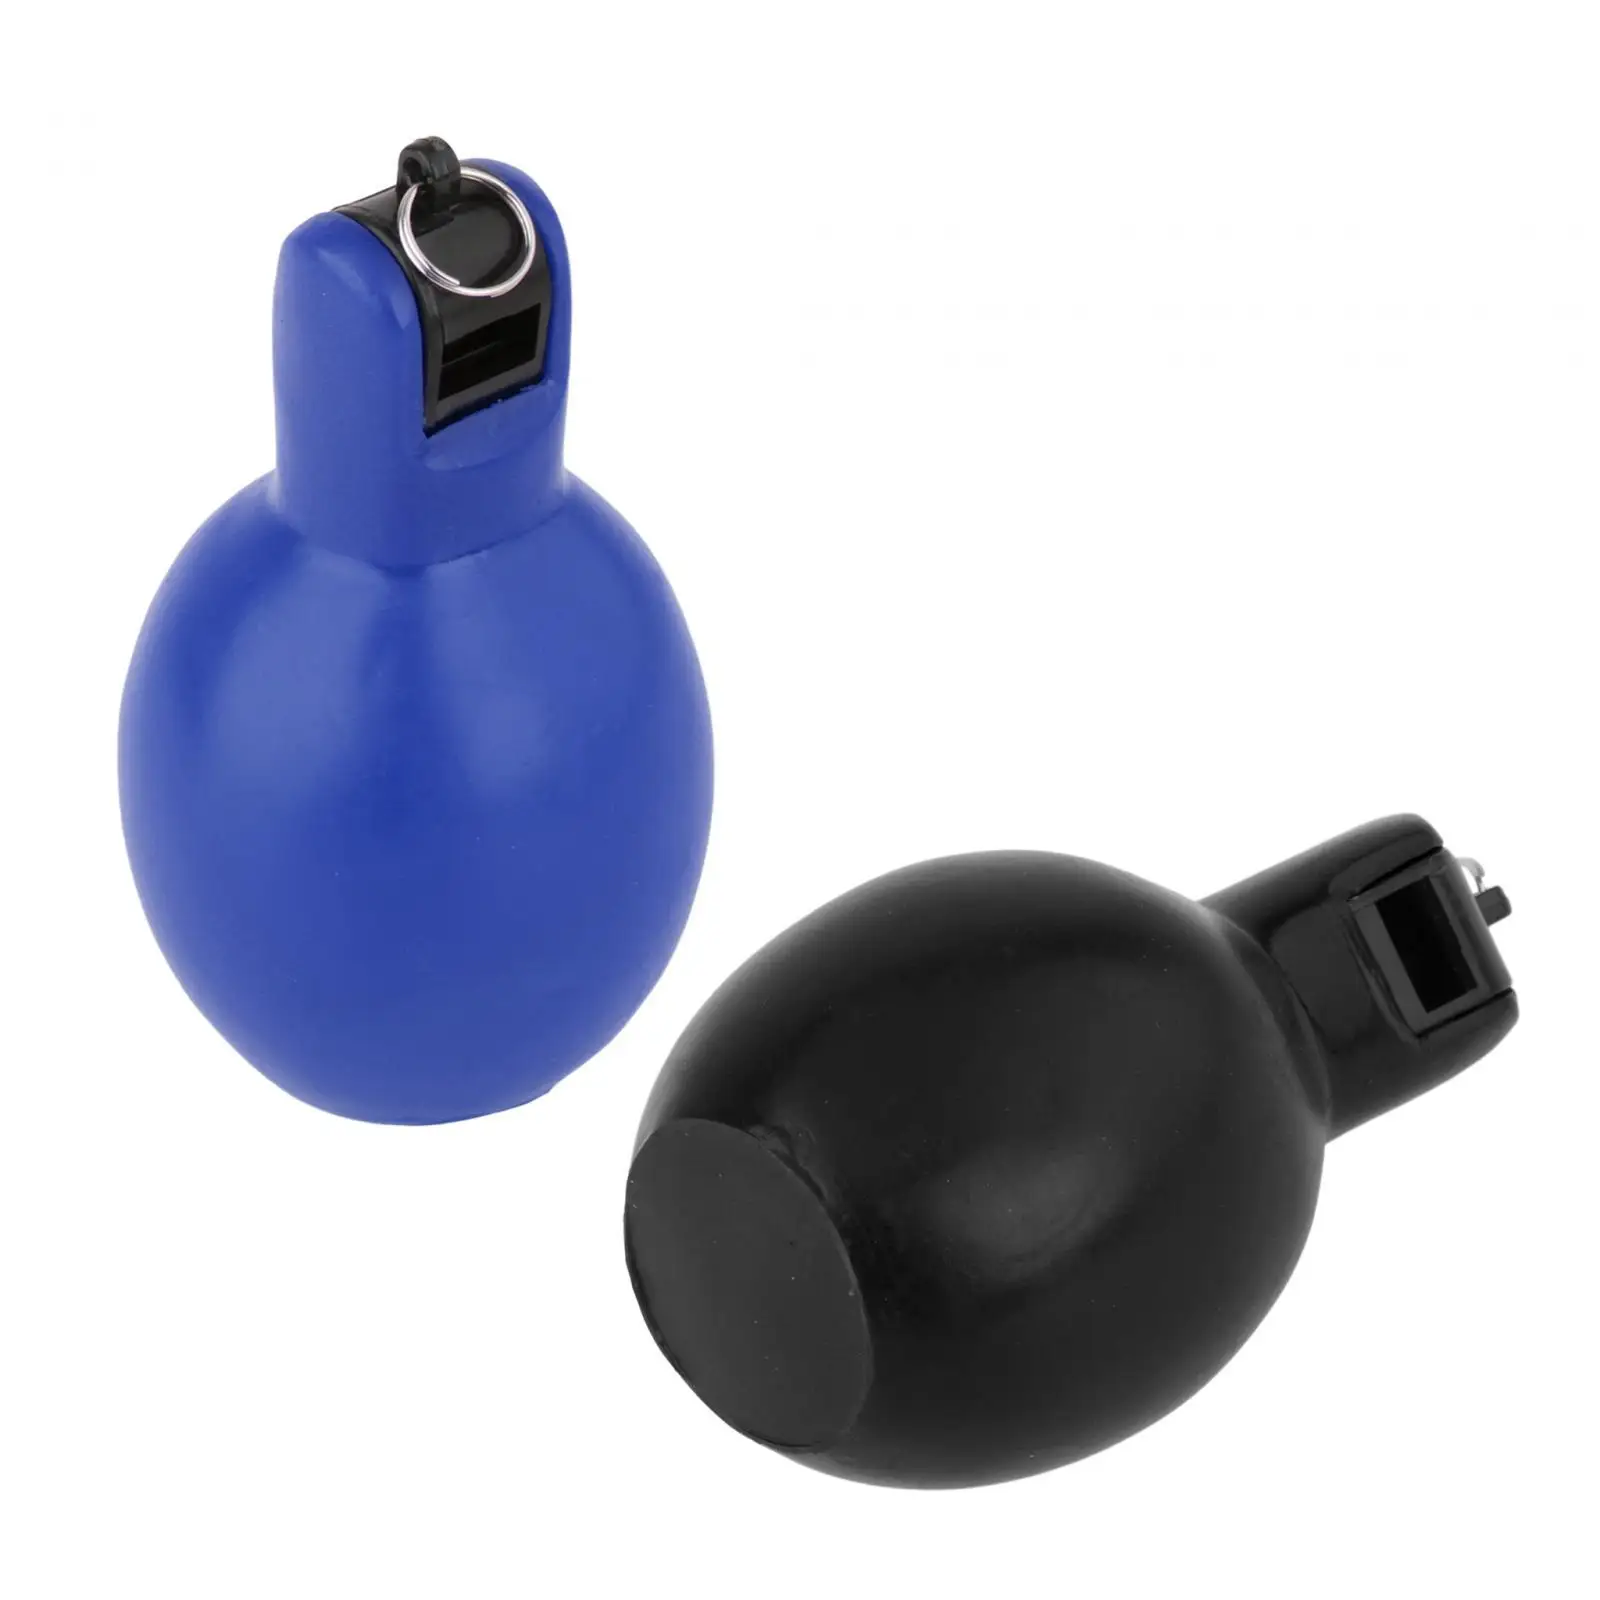 2Pcs Hand Squeeze Whistles Coaches Whistle Loud Sports Trainer Whistle for Training Trekking Coaches Children Referees